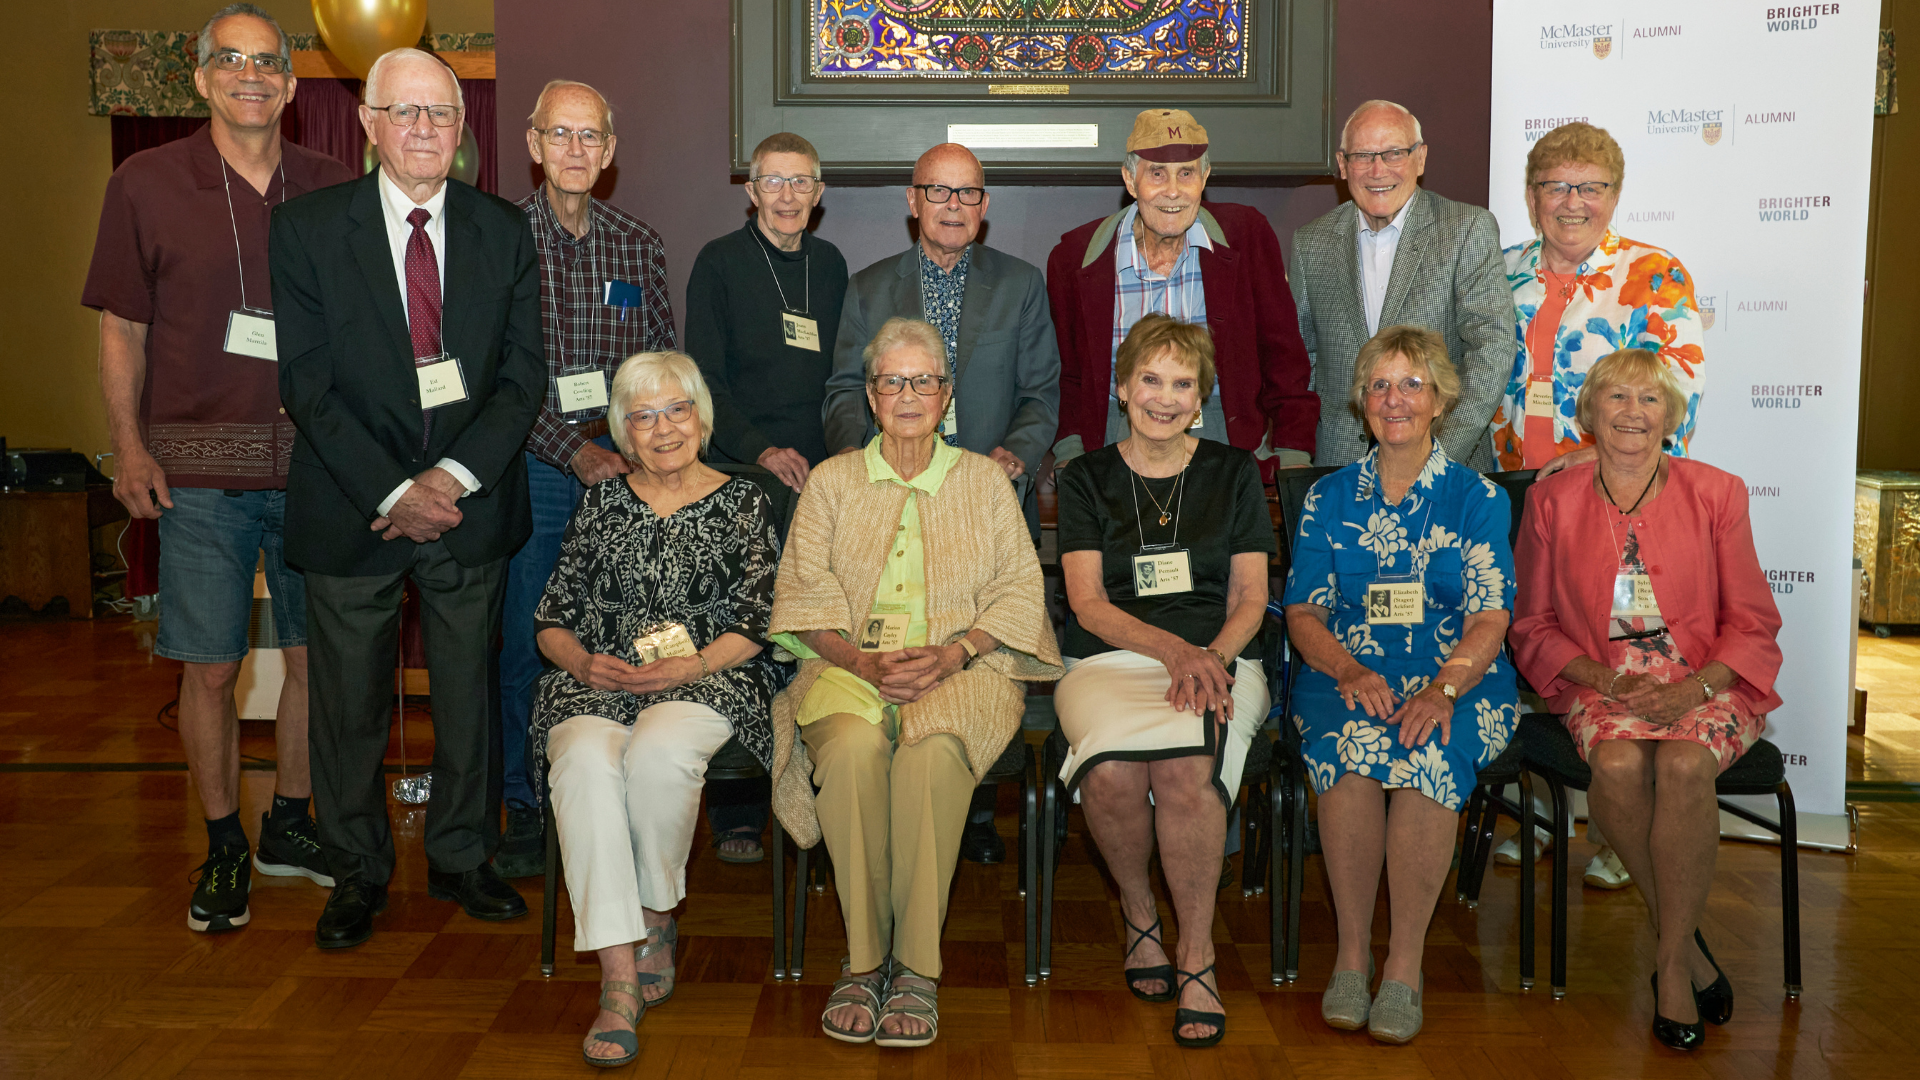 Thirteen McMaster alumni posing for a photo inside McMaster Alumni Hall. Some people are standing and some are seated. 